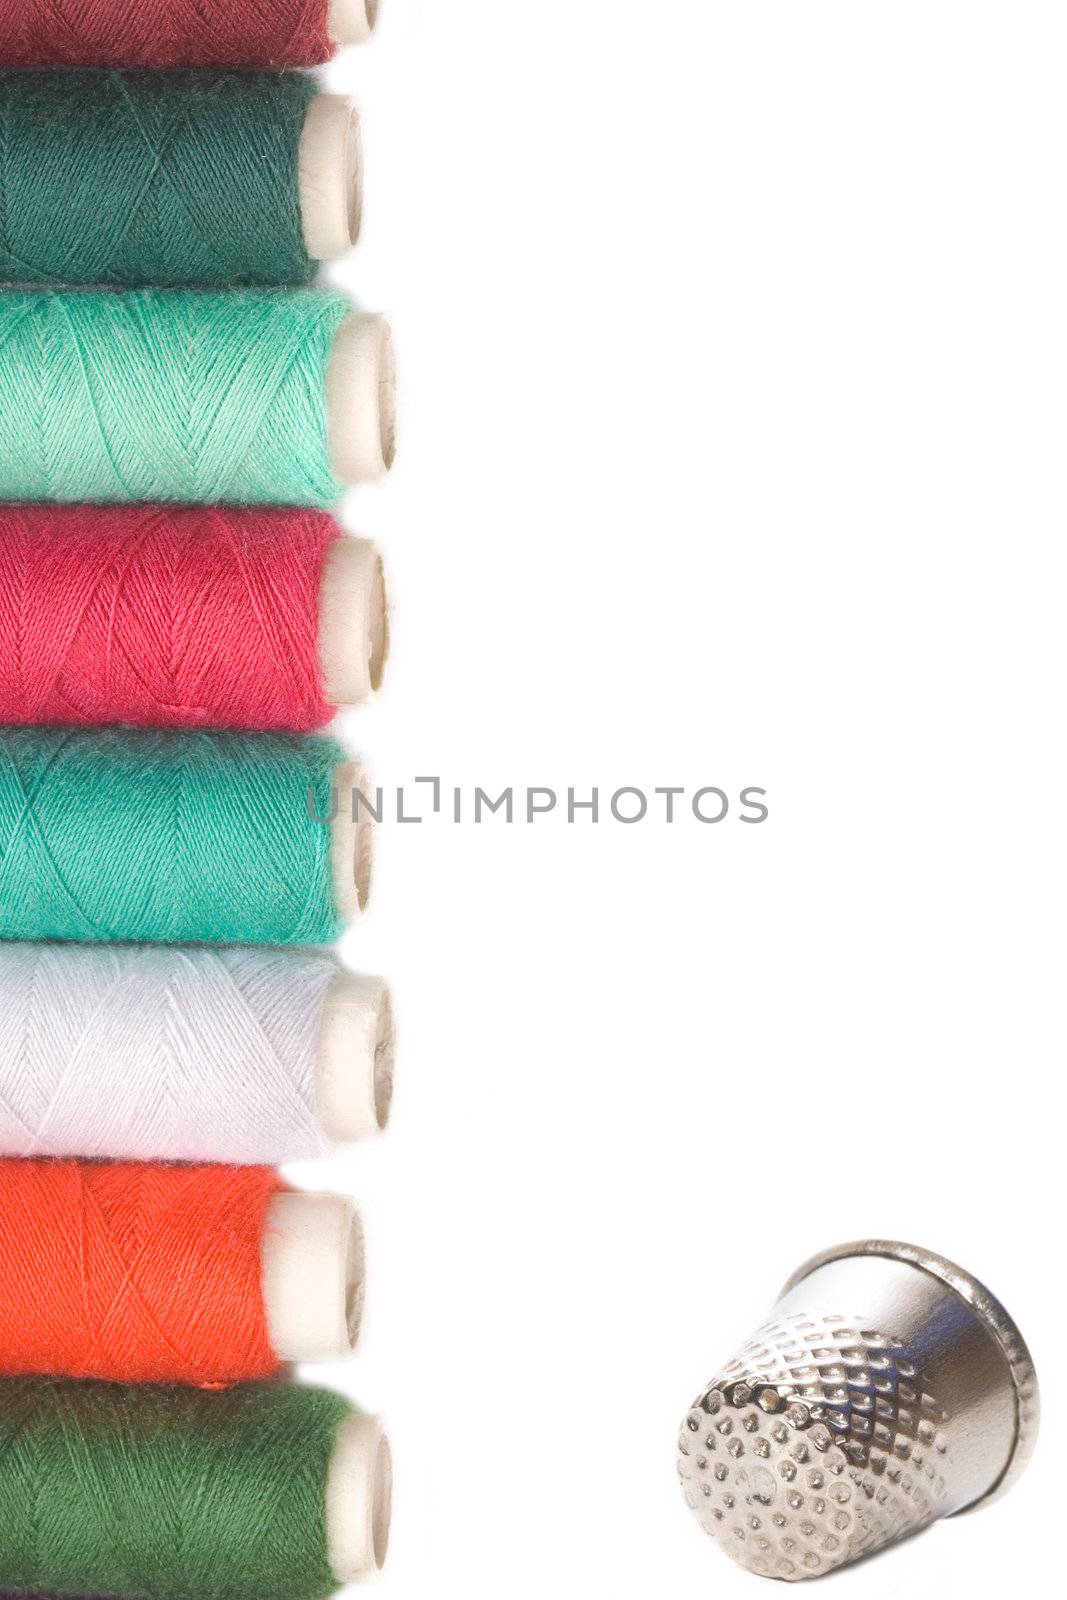 spools of thread and thimble for sewing by Carche